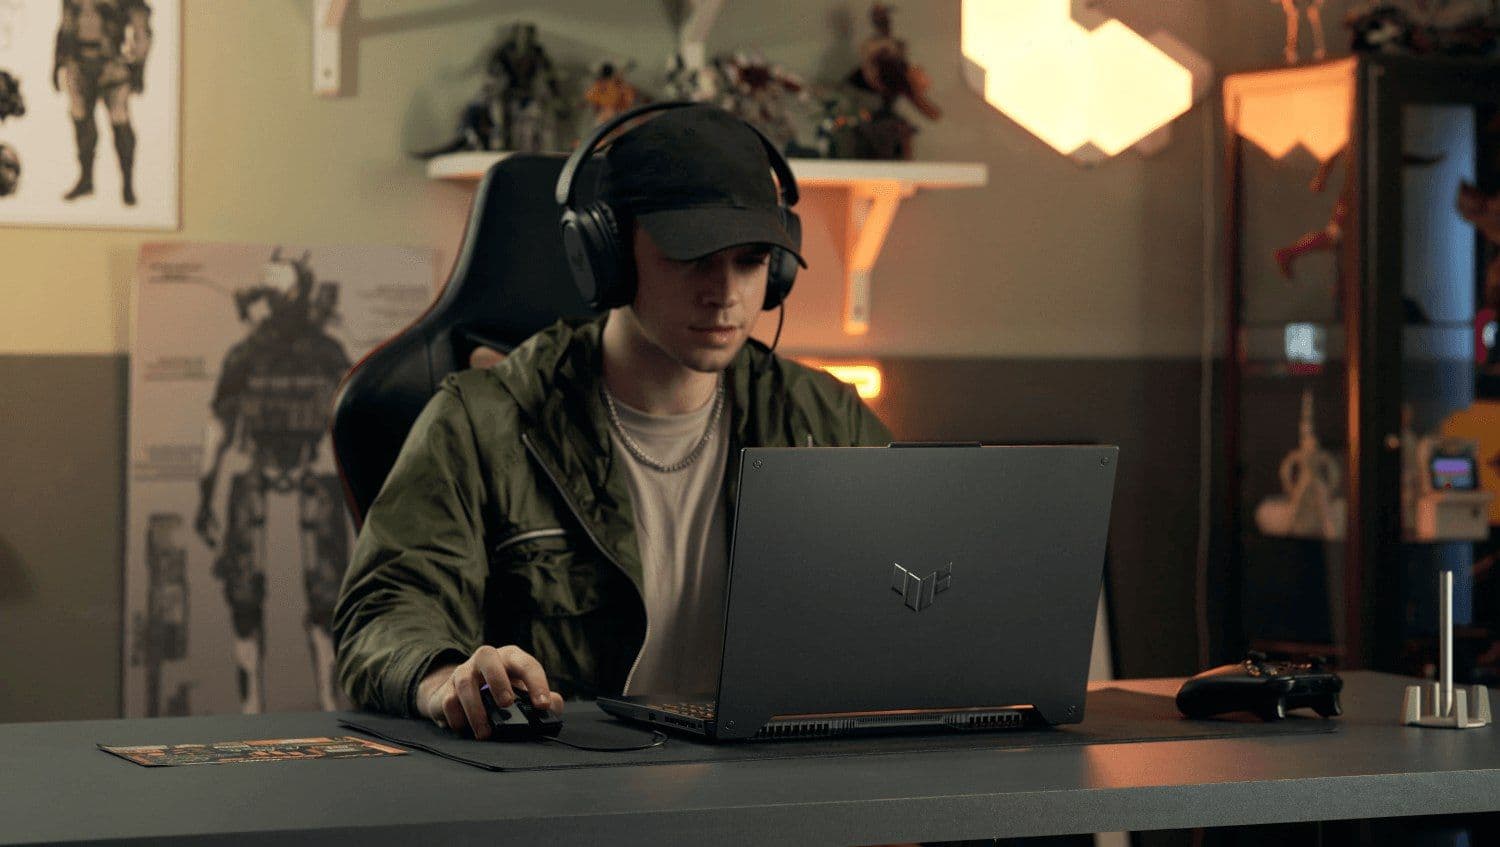 Top Five Laptops for Studying and Gaming